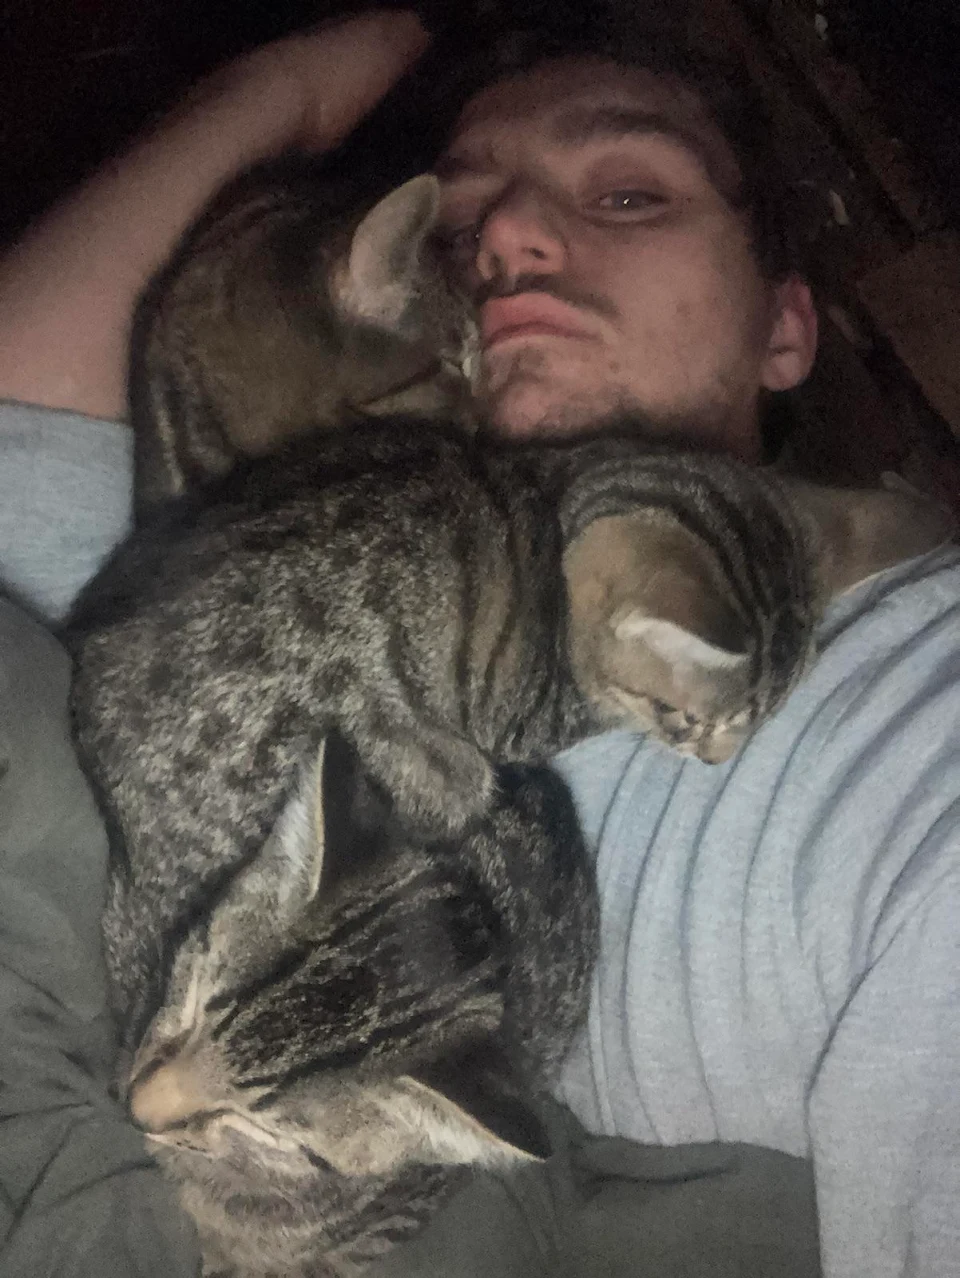 Me trying to get a peaceful night sleep, but my kittens wanted to join.